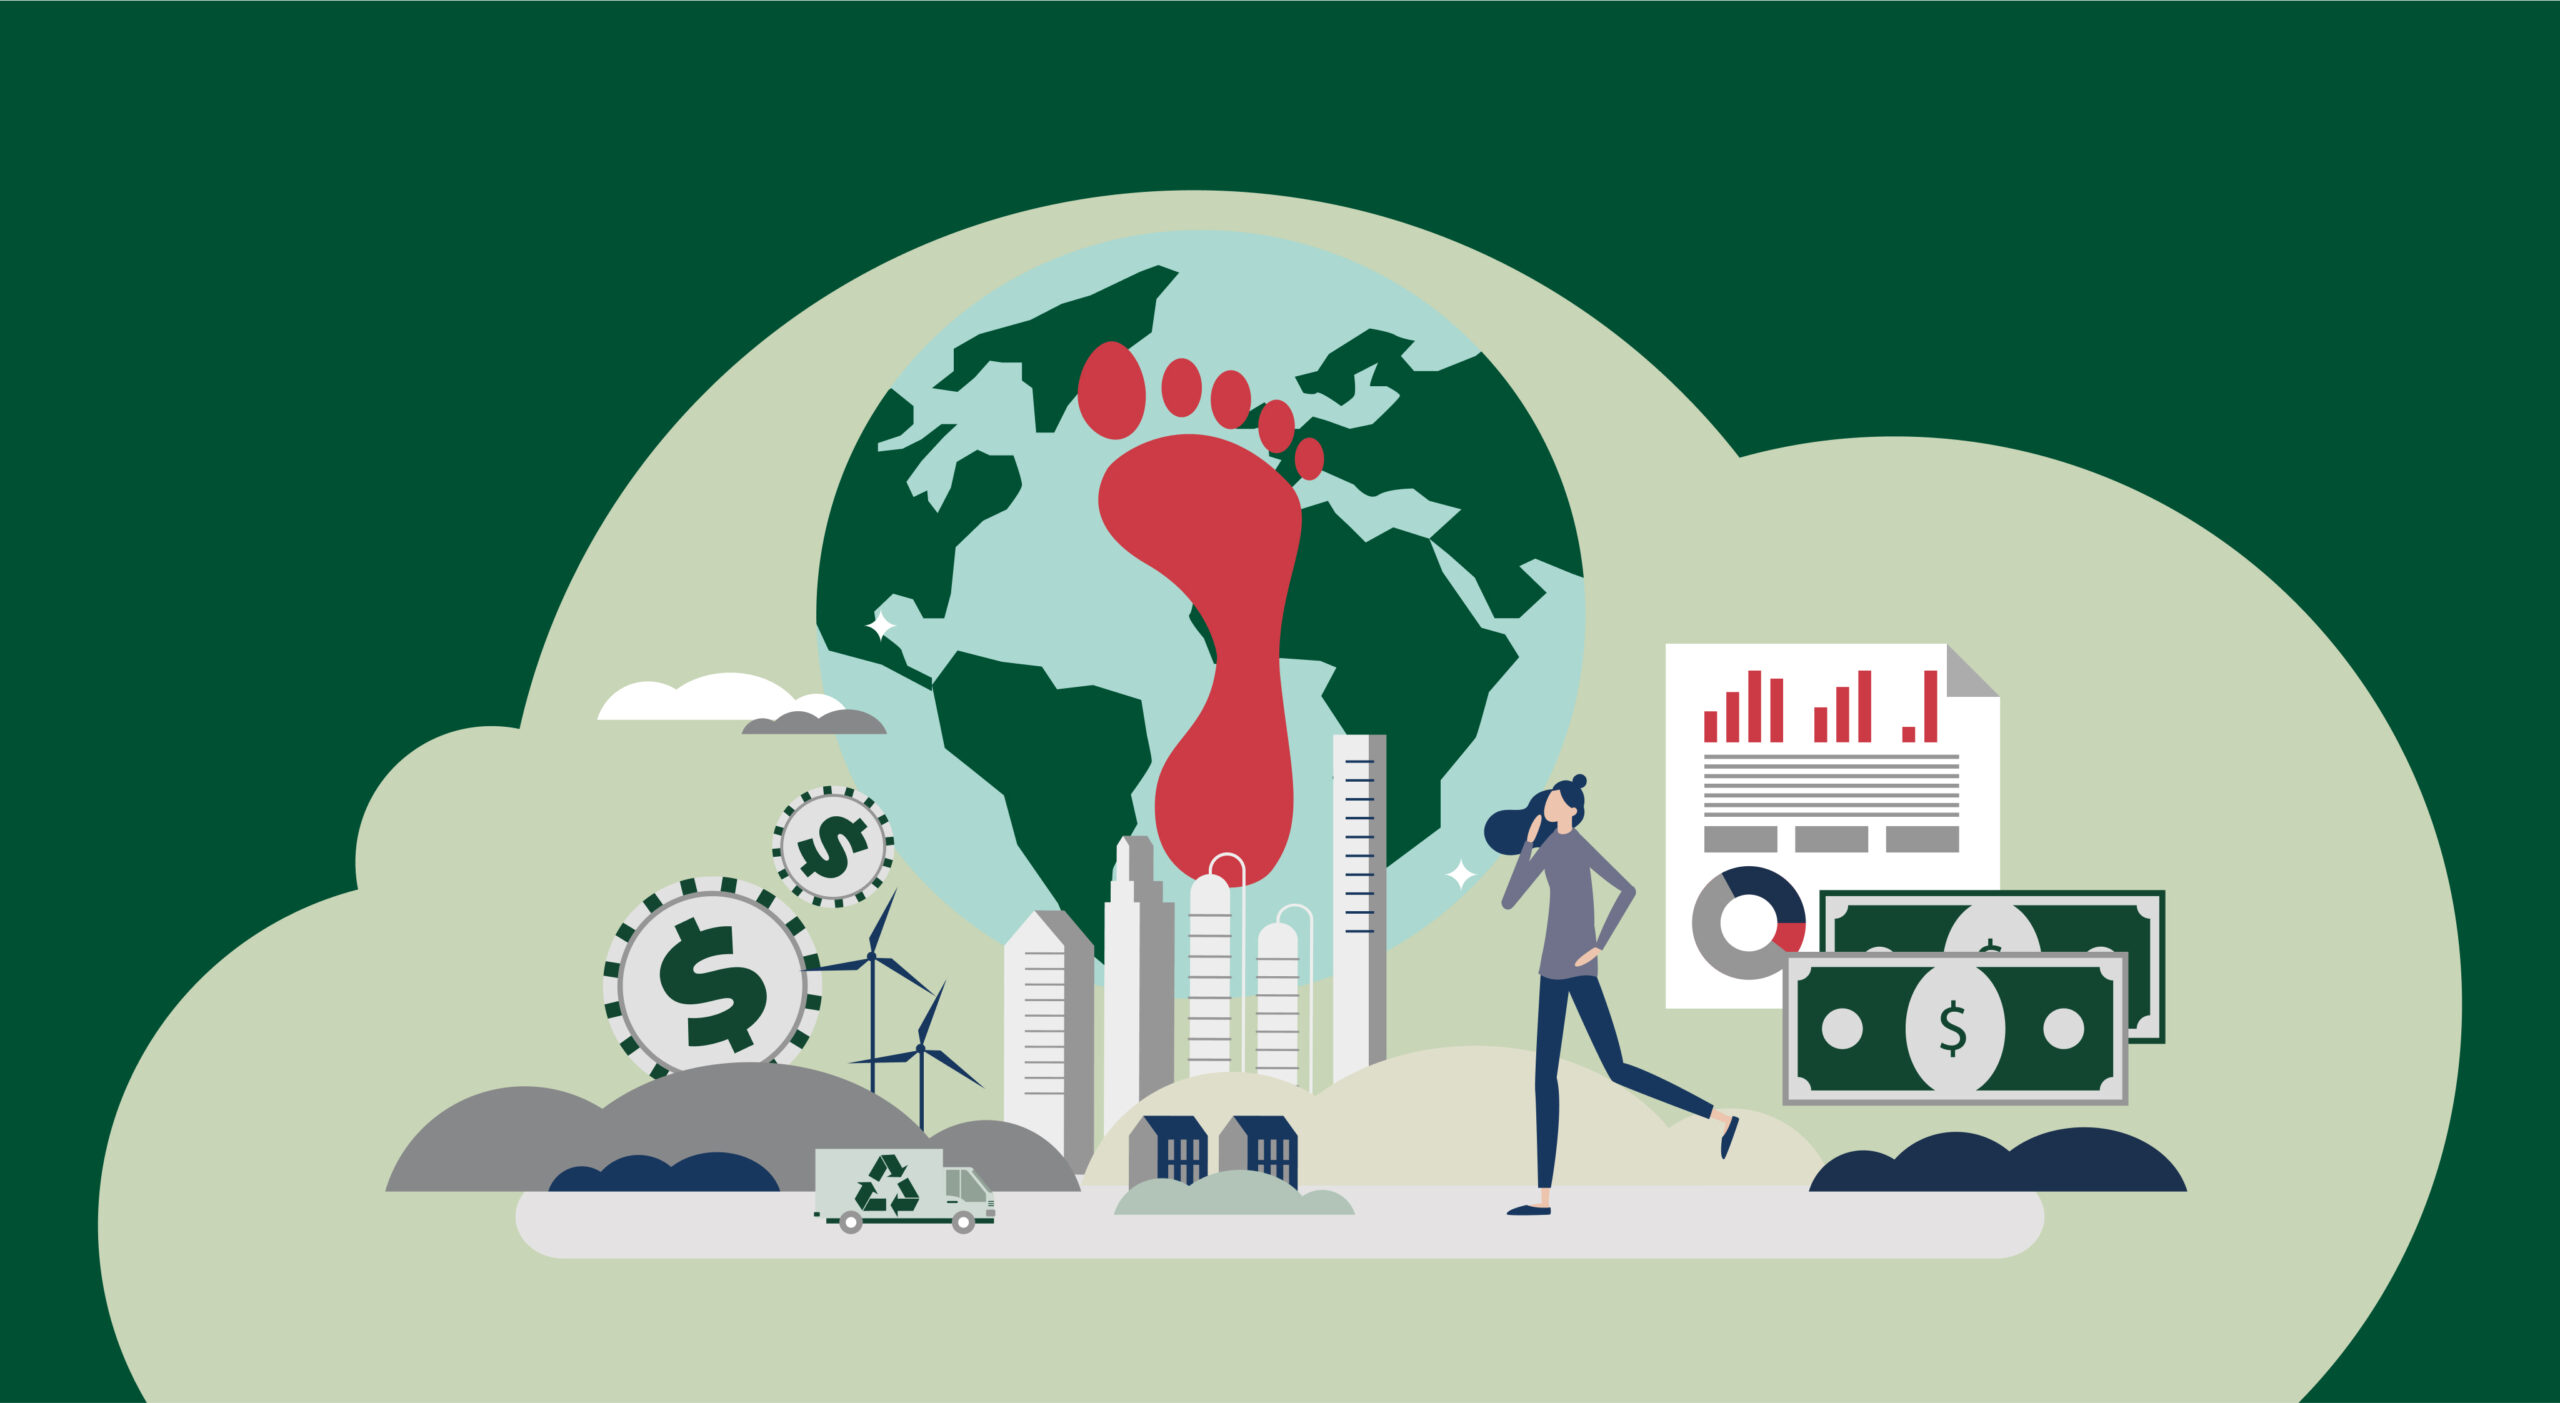 The Economic Footprint as a KPI for economic sustainability